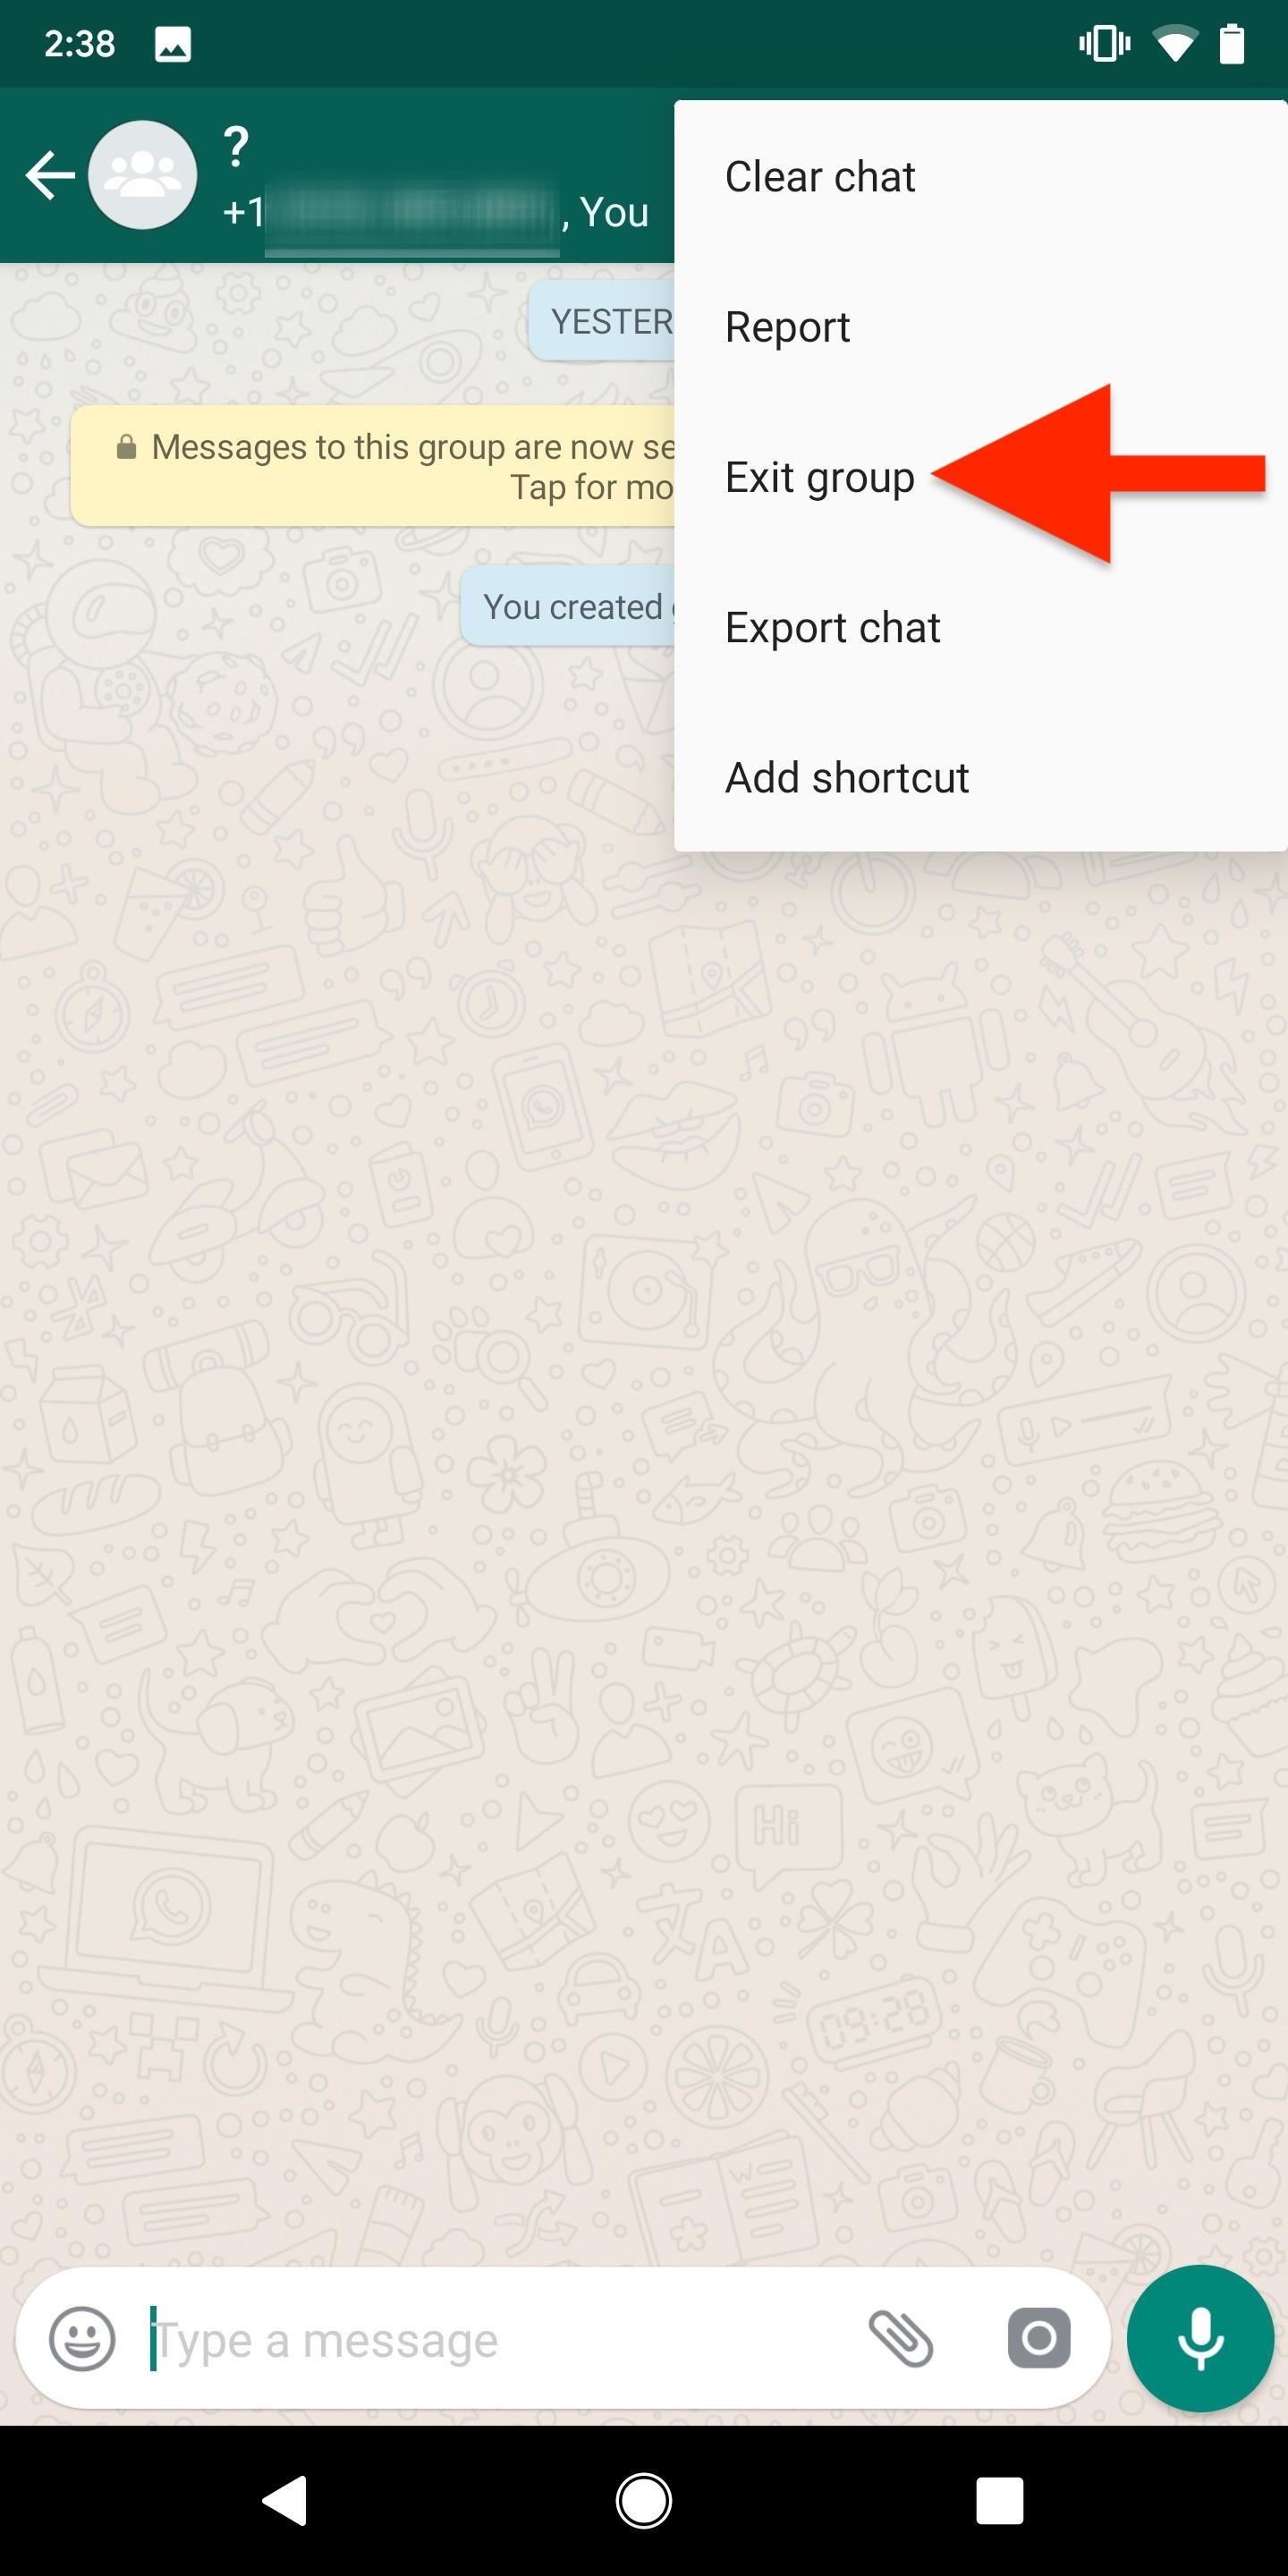 How to Mute or Leave Group Chats in WhatsApp, So You Never Get Annoyed by Notifications